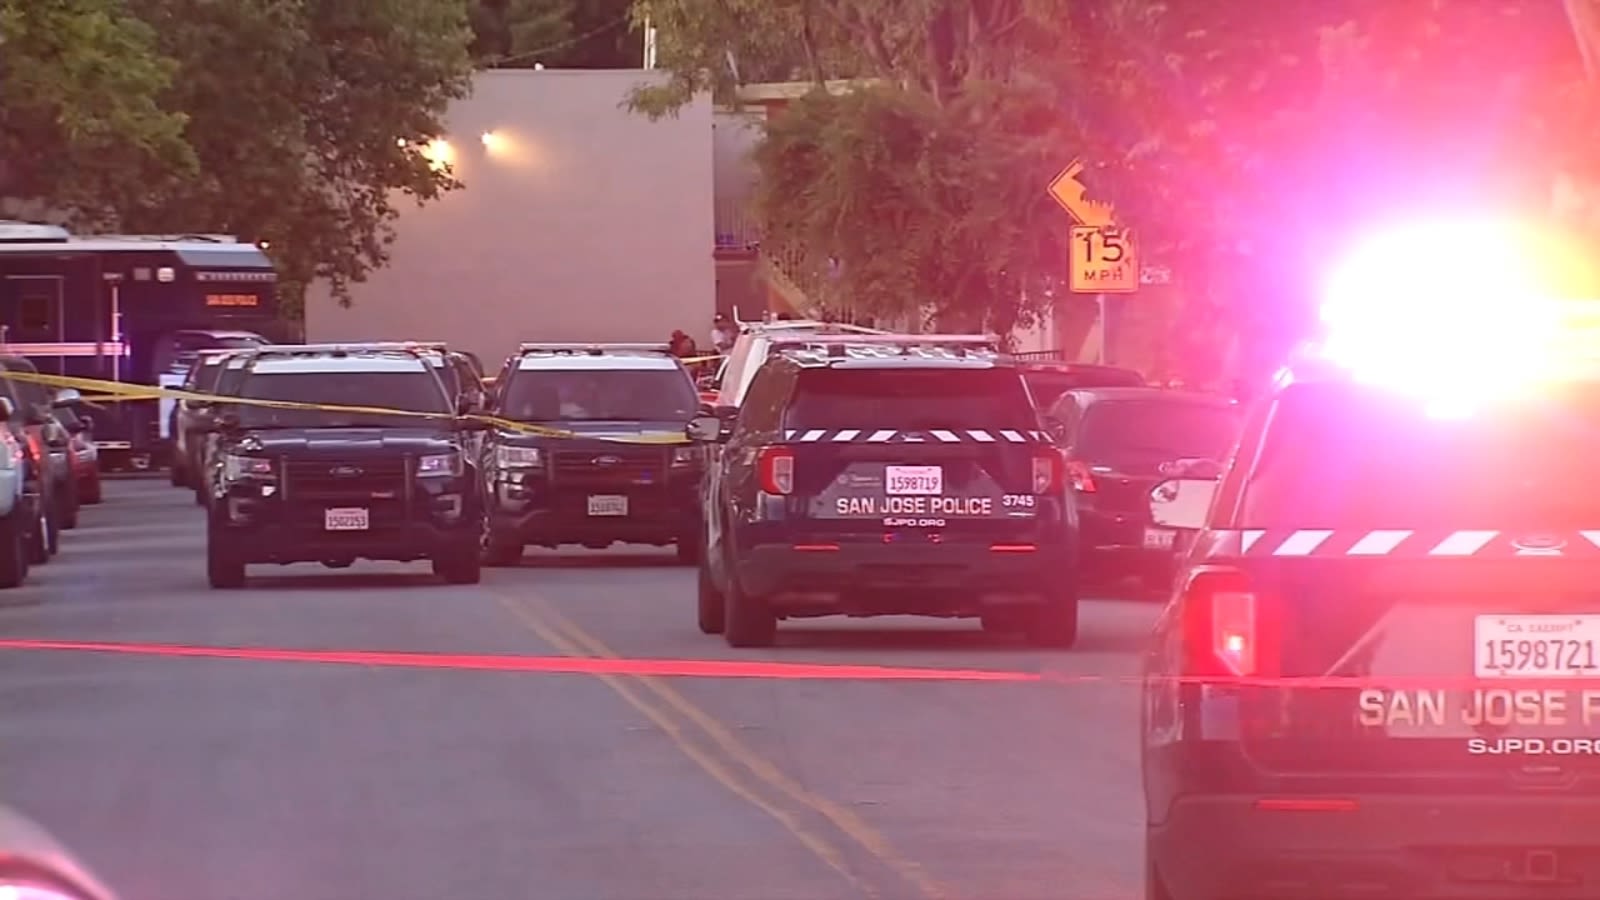 Suspect in critical condition after being shot by San Jose police officers